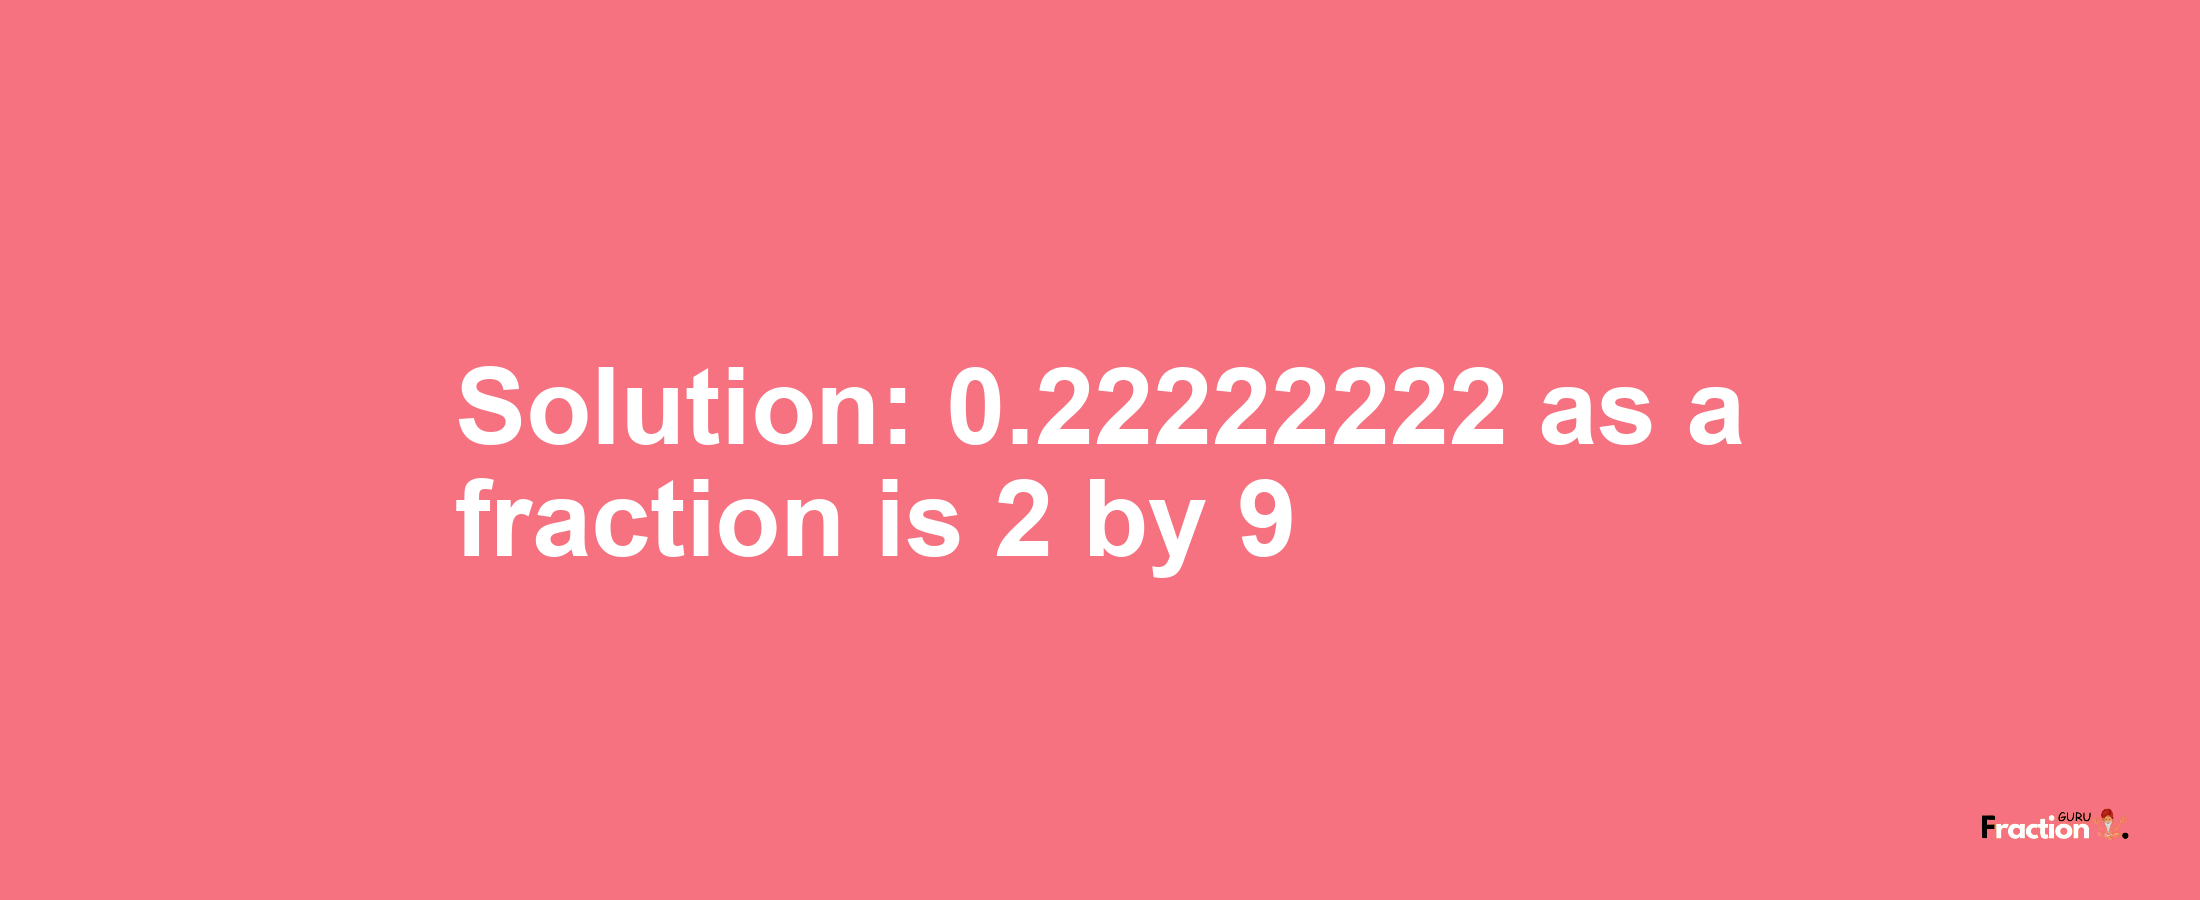 Solution:0.22222222 as a fraction is 2/9